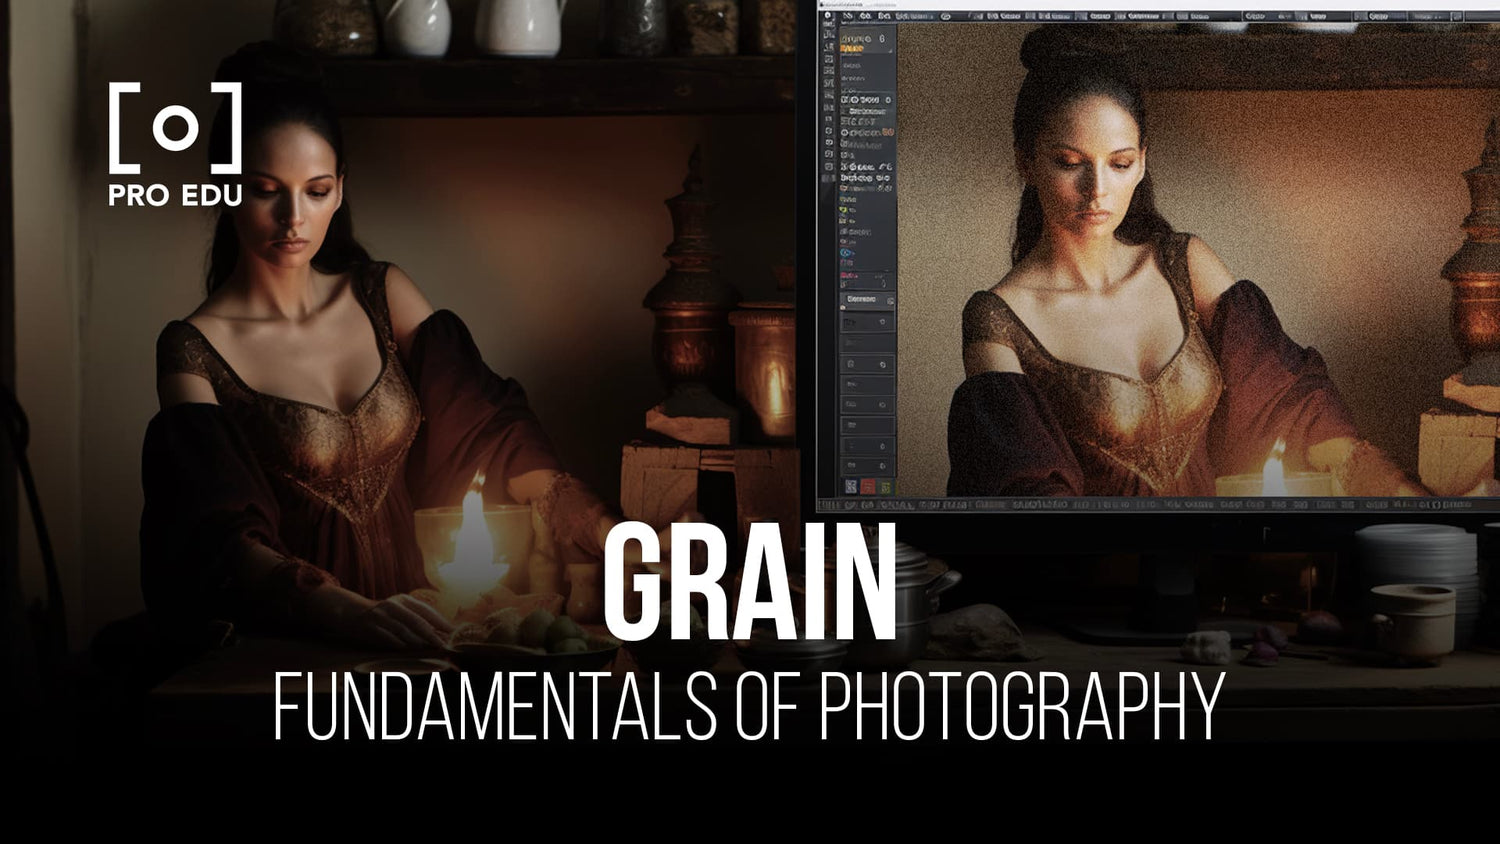 Understanding and creatively using grain in photography for artistic effect